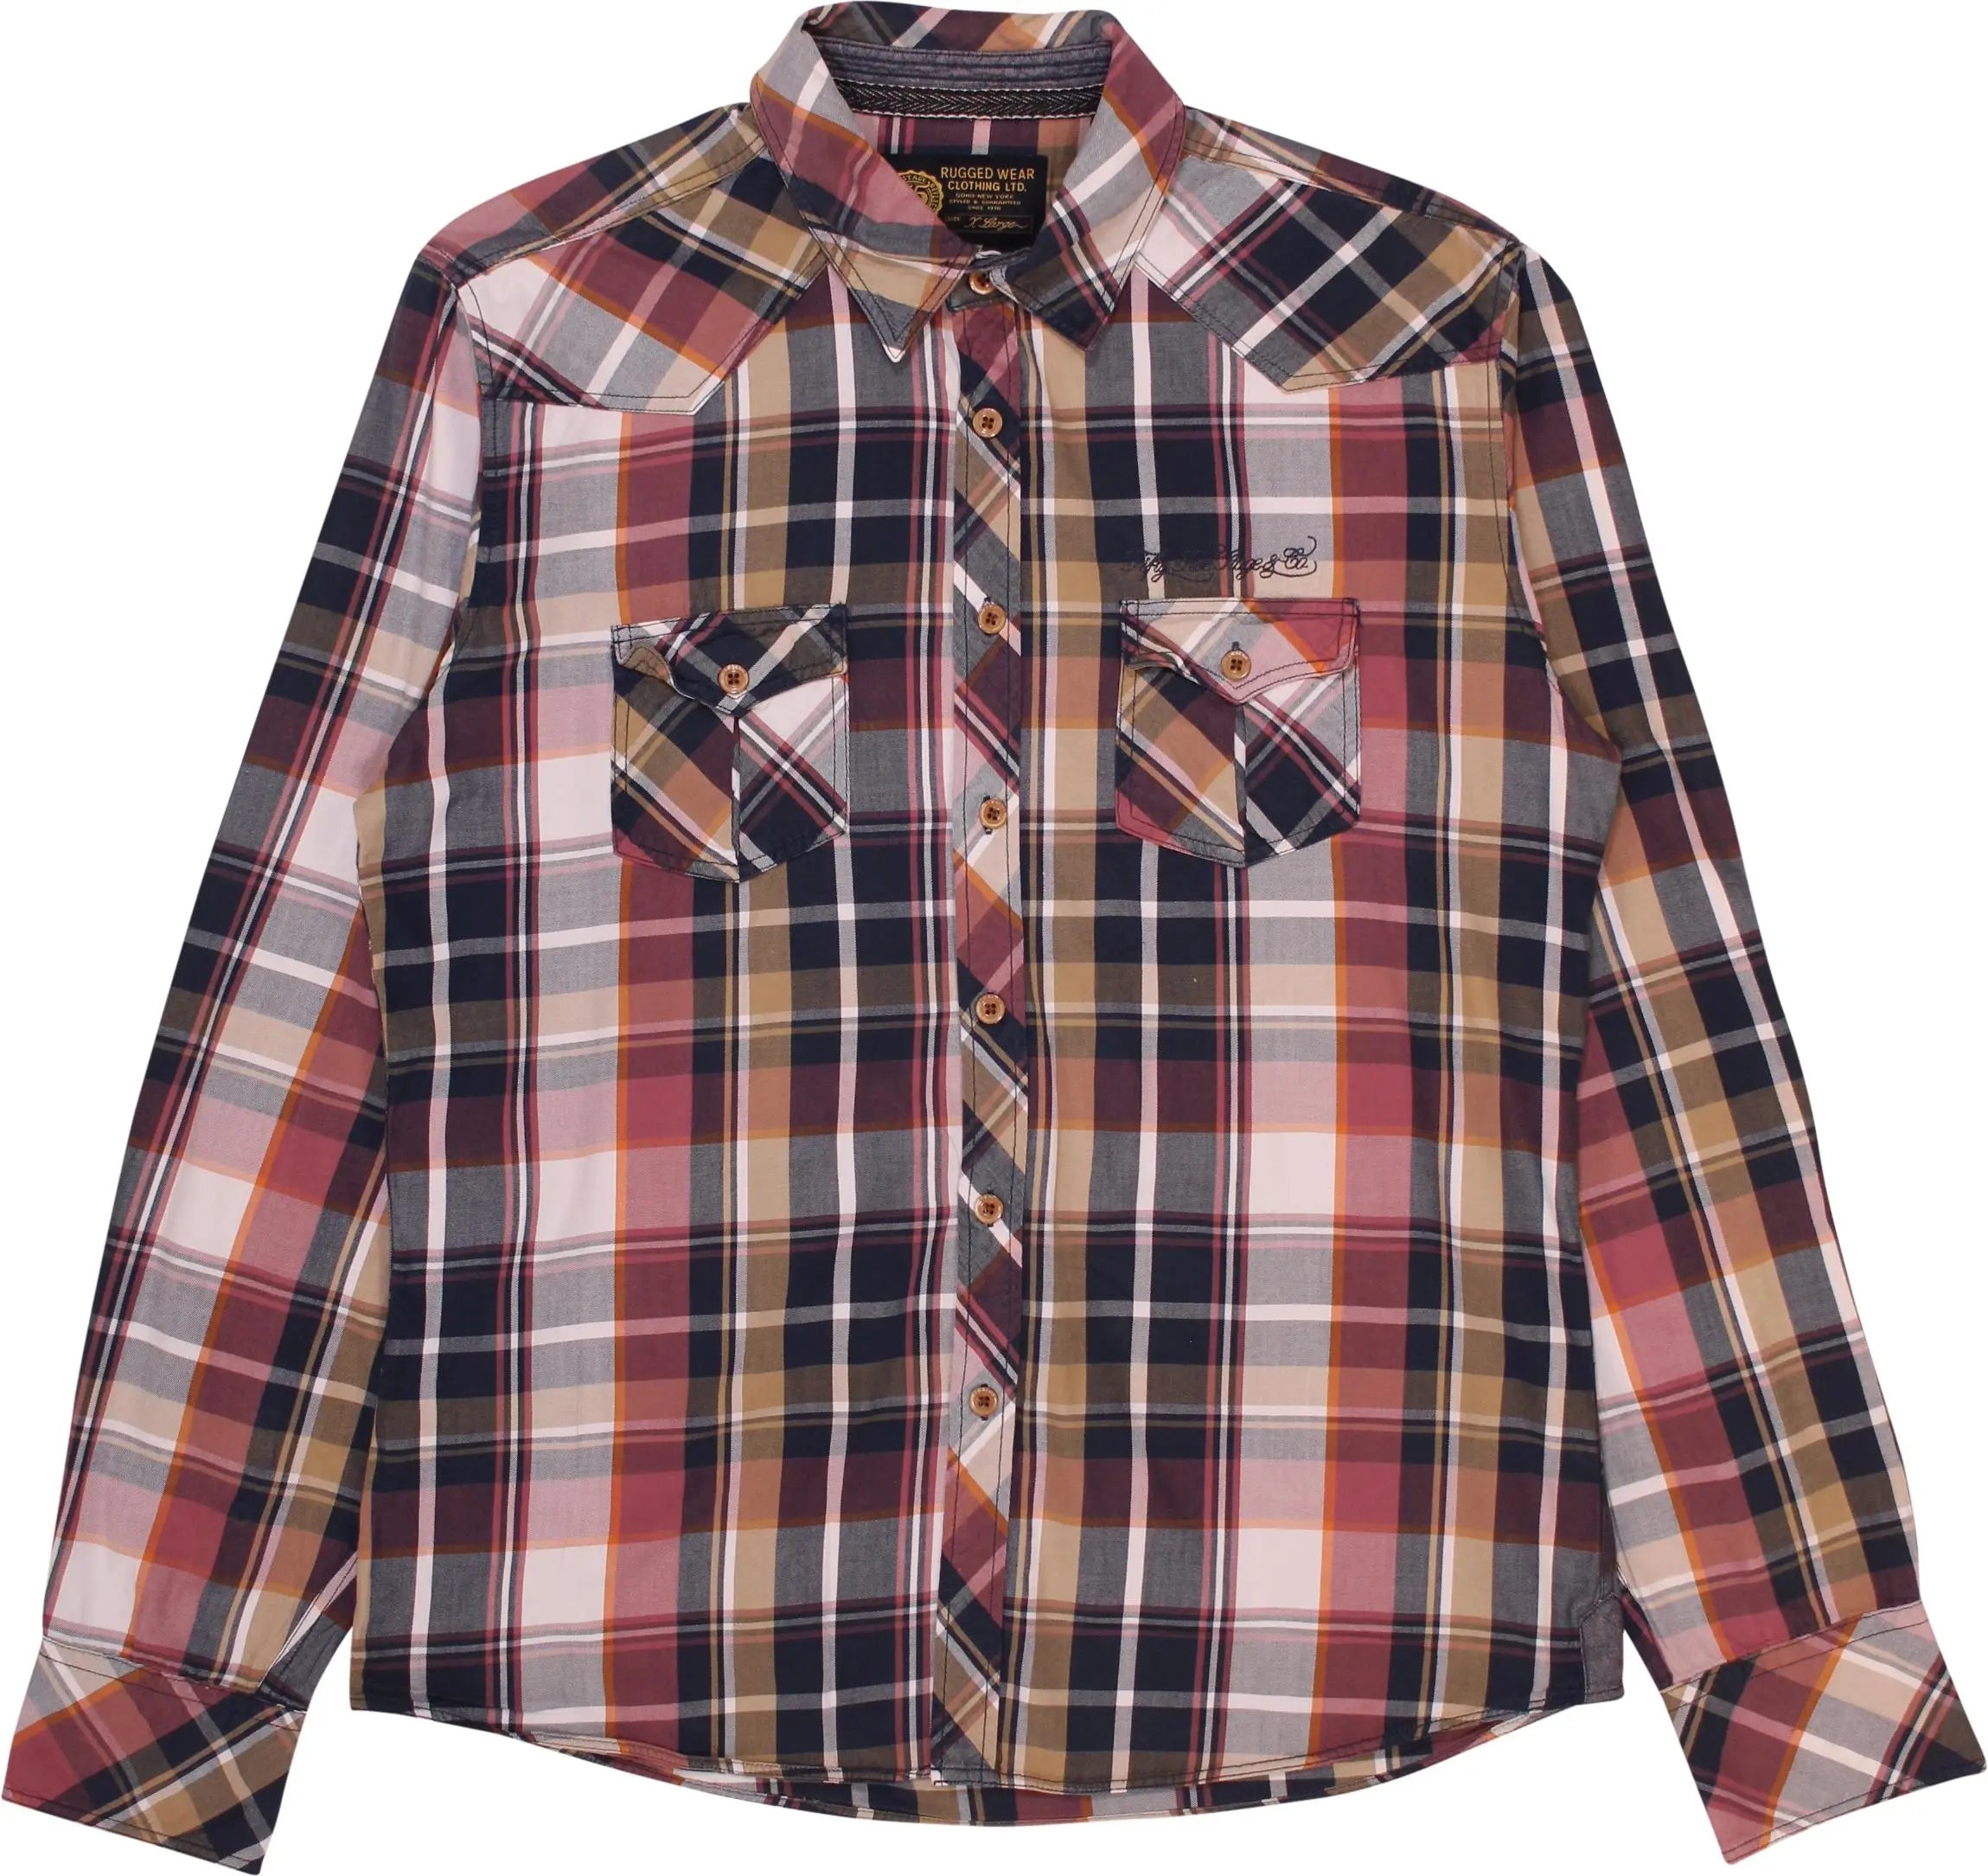 Rugged Wear Clothing LTD. - Checked Shirt- ThriftTale.com - Vintage and second handclothing